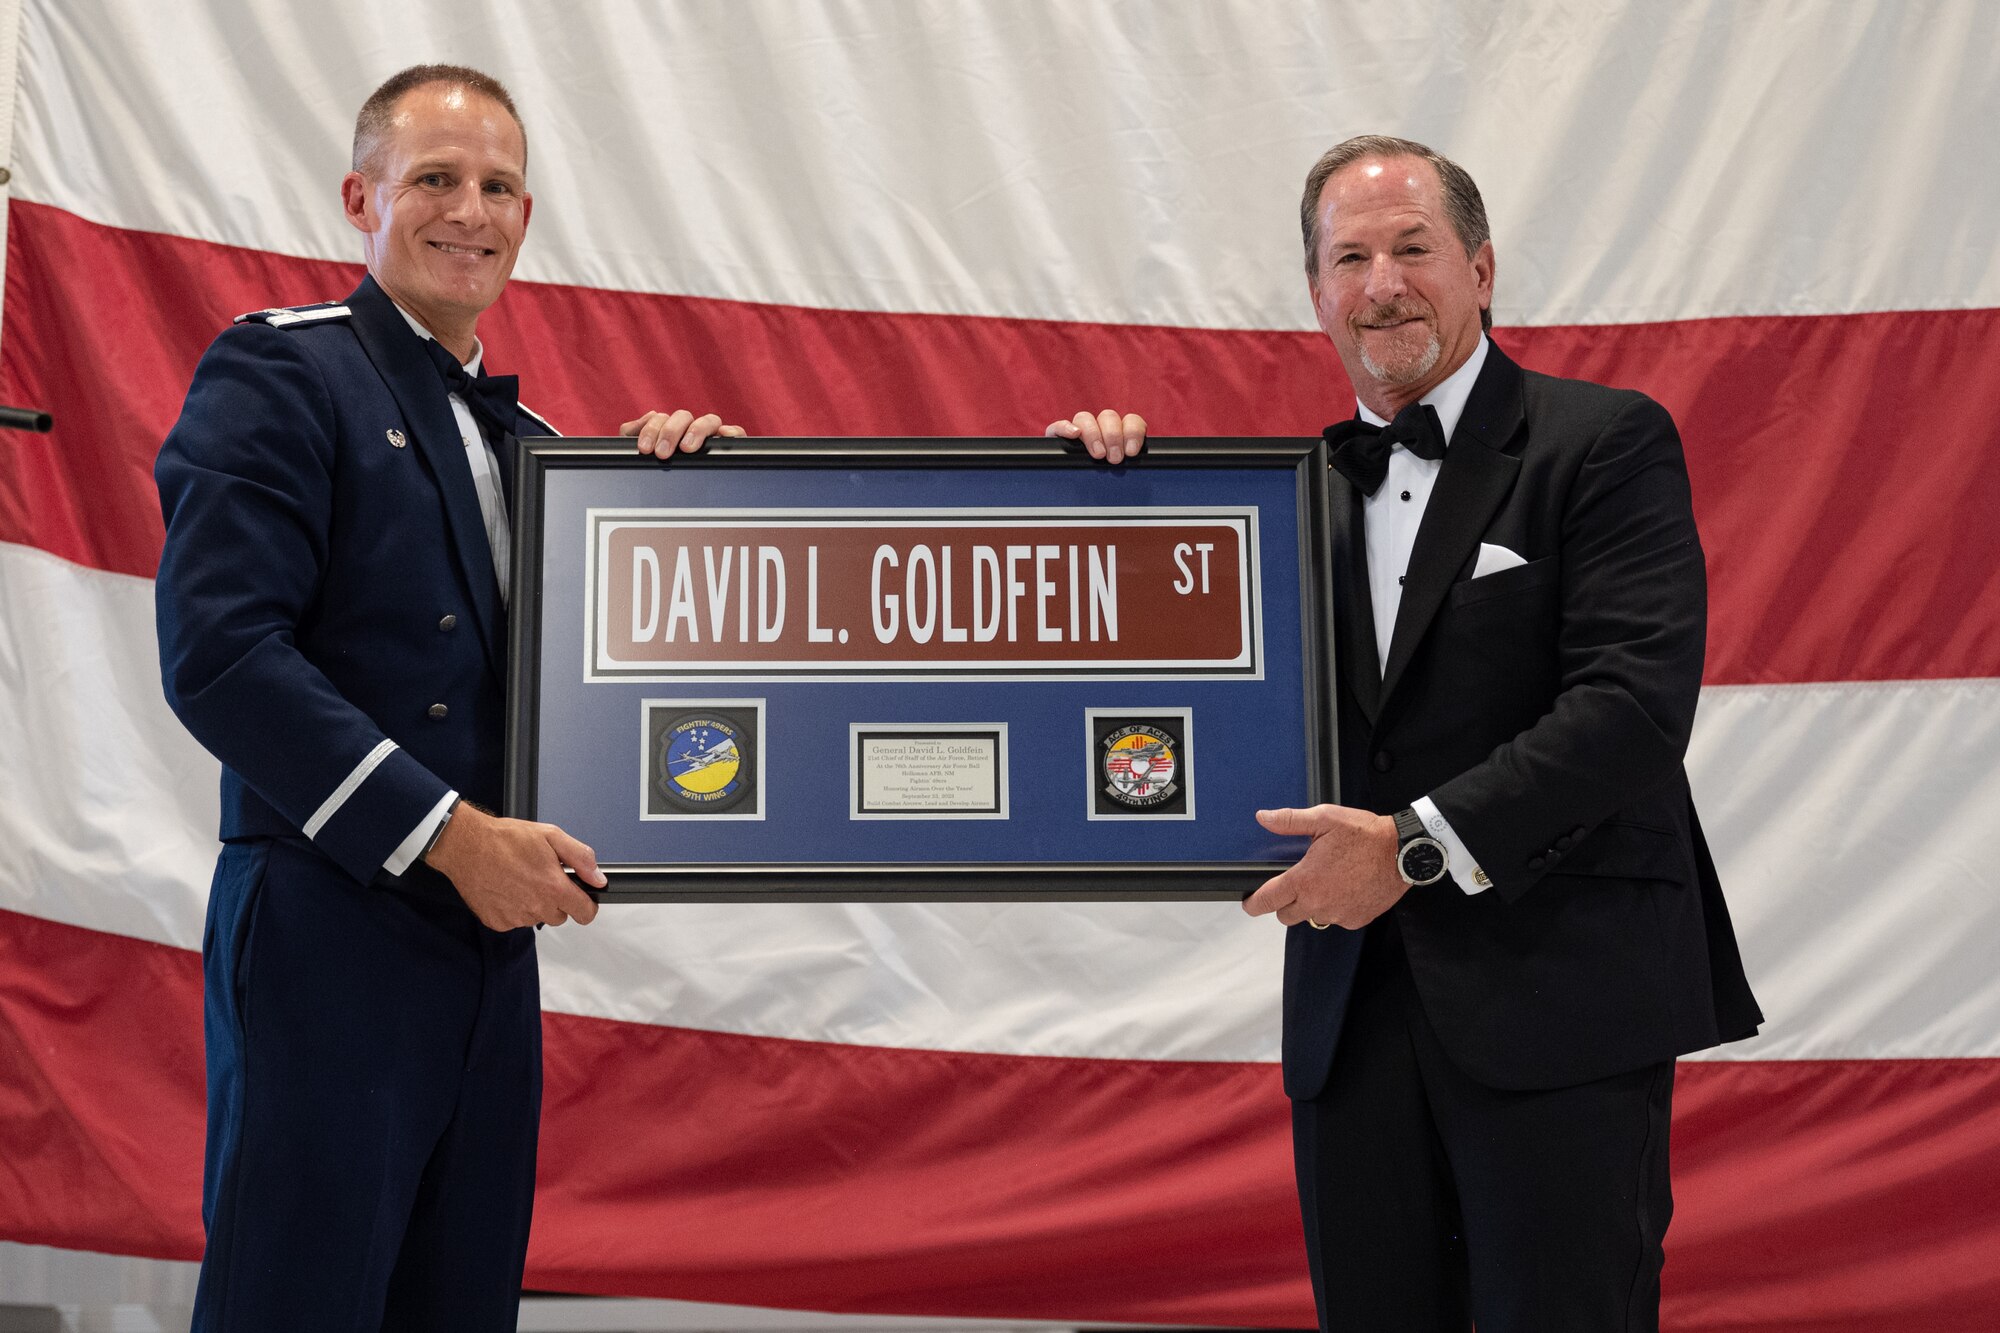 Retired U.S. Air Force Gen. David L. Goldfein, right, receives a gift from U.S. Air Force Col. Justin Spears, 49th Wing commander, during the 2023 Holloman Air Force Ball at Holloman Air Force Base, Sept. 23, 2023. In June of 2006, Goldfein assumed command of the 49th Fighter Wing, which members of the current 49th Wing have decided to commemorate by having him attend the ball as our keynote speaker and naming a street in his honor. (U.S. Air Force photo by Senior Airman Antonio Salfran)